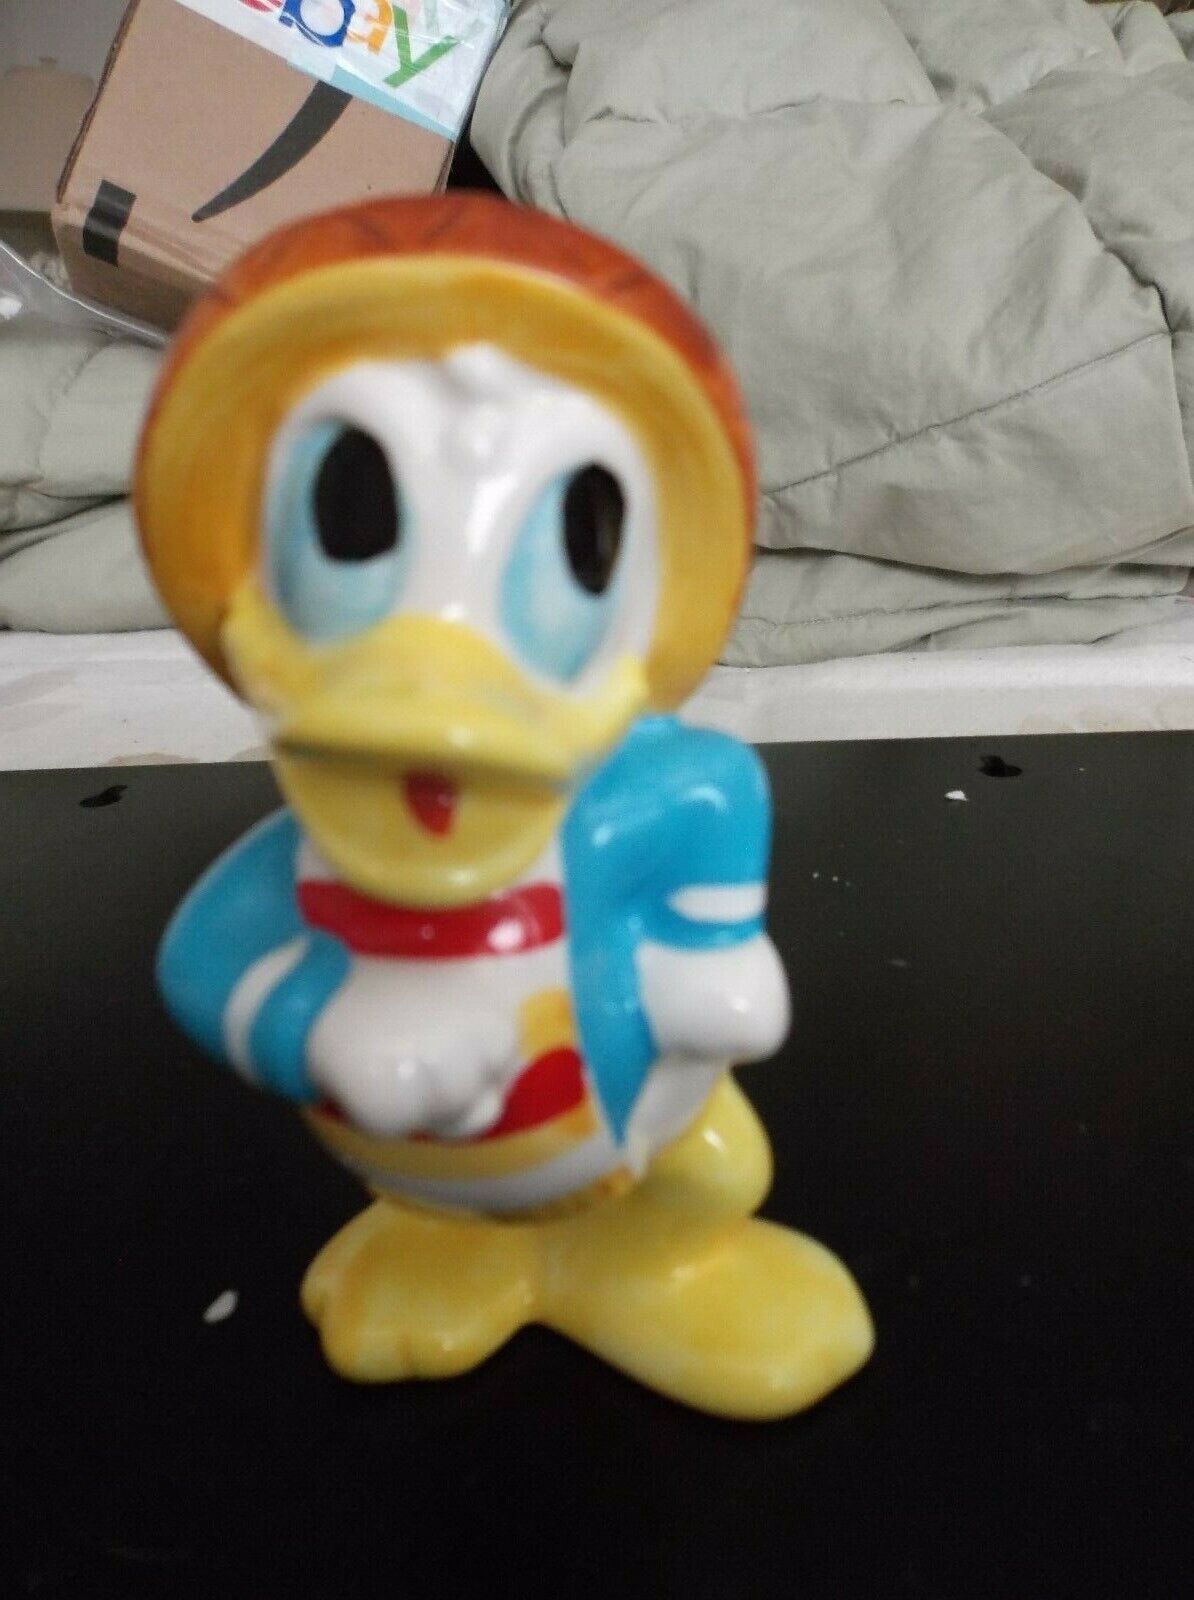 DONALD DUCK THREE CABALLEROS PORCELAIN FIGURINE MADE IN JAPAN 3 1/2 INCHES TALL